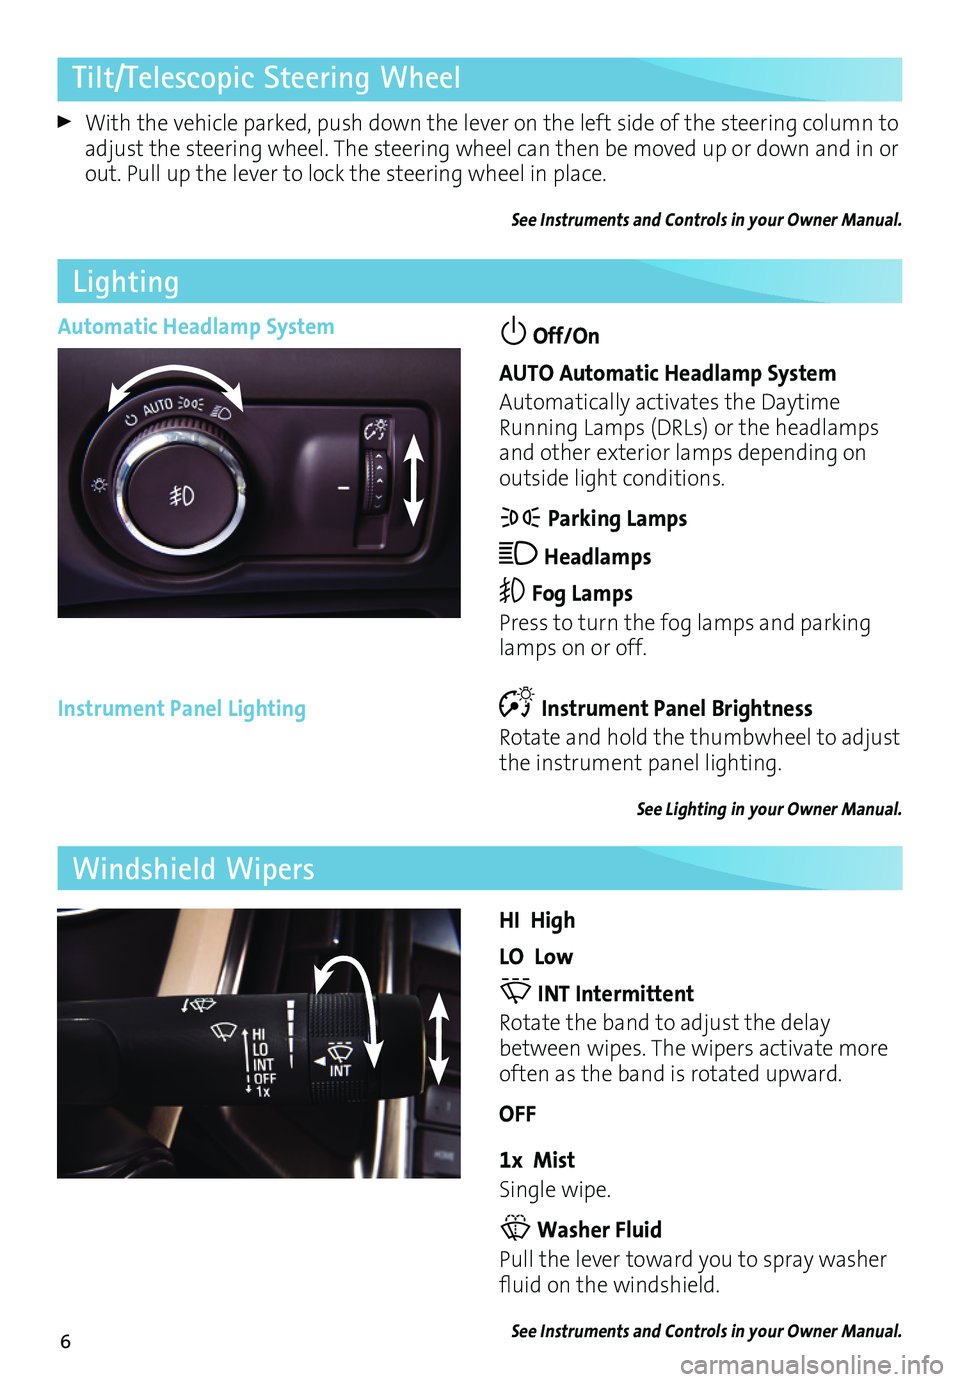 BUICK VERANO 2016  Get To Know Guide 6
Tilt/Telescopic Steering Wheel 
 With the vehicle parked, push down the lever on the left side of the steering column to adjust the steering wheel. The steering wheel can then be moved up or down an